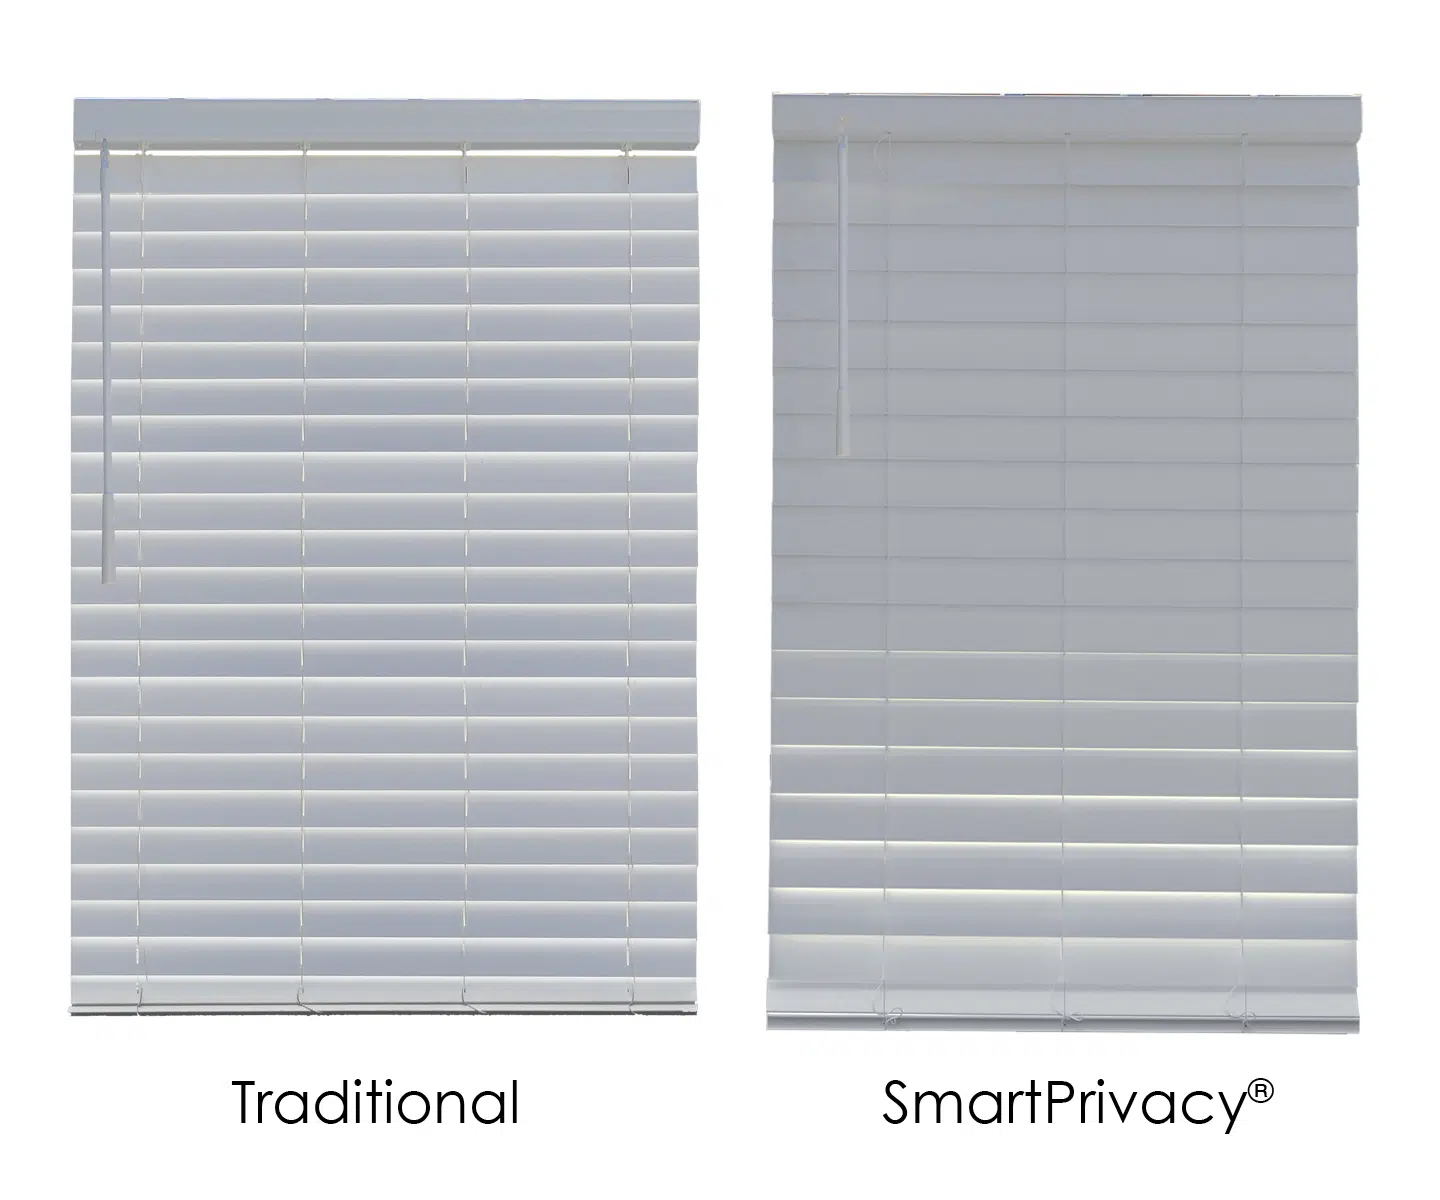 Comparison of how traditional blinds let light in and SmartPrivacy blinds do not